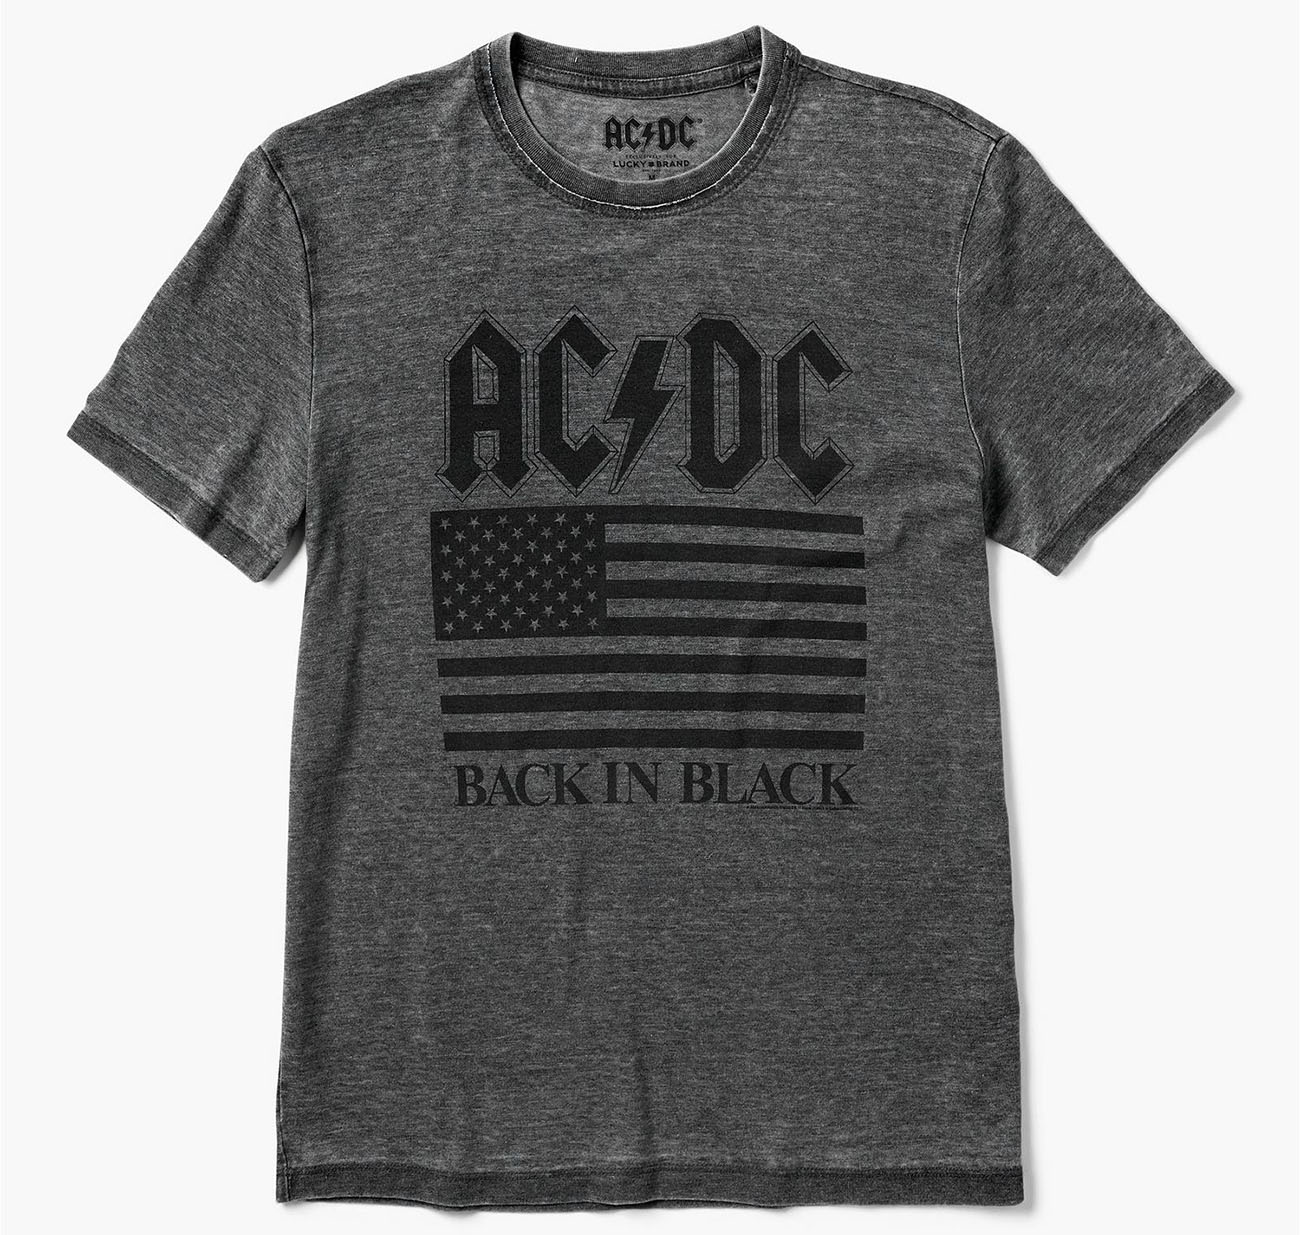 acdc back in black flag tee